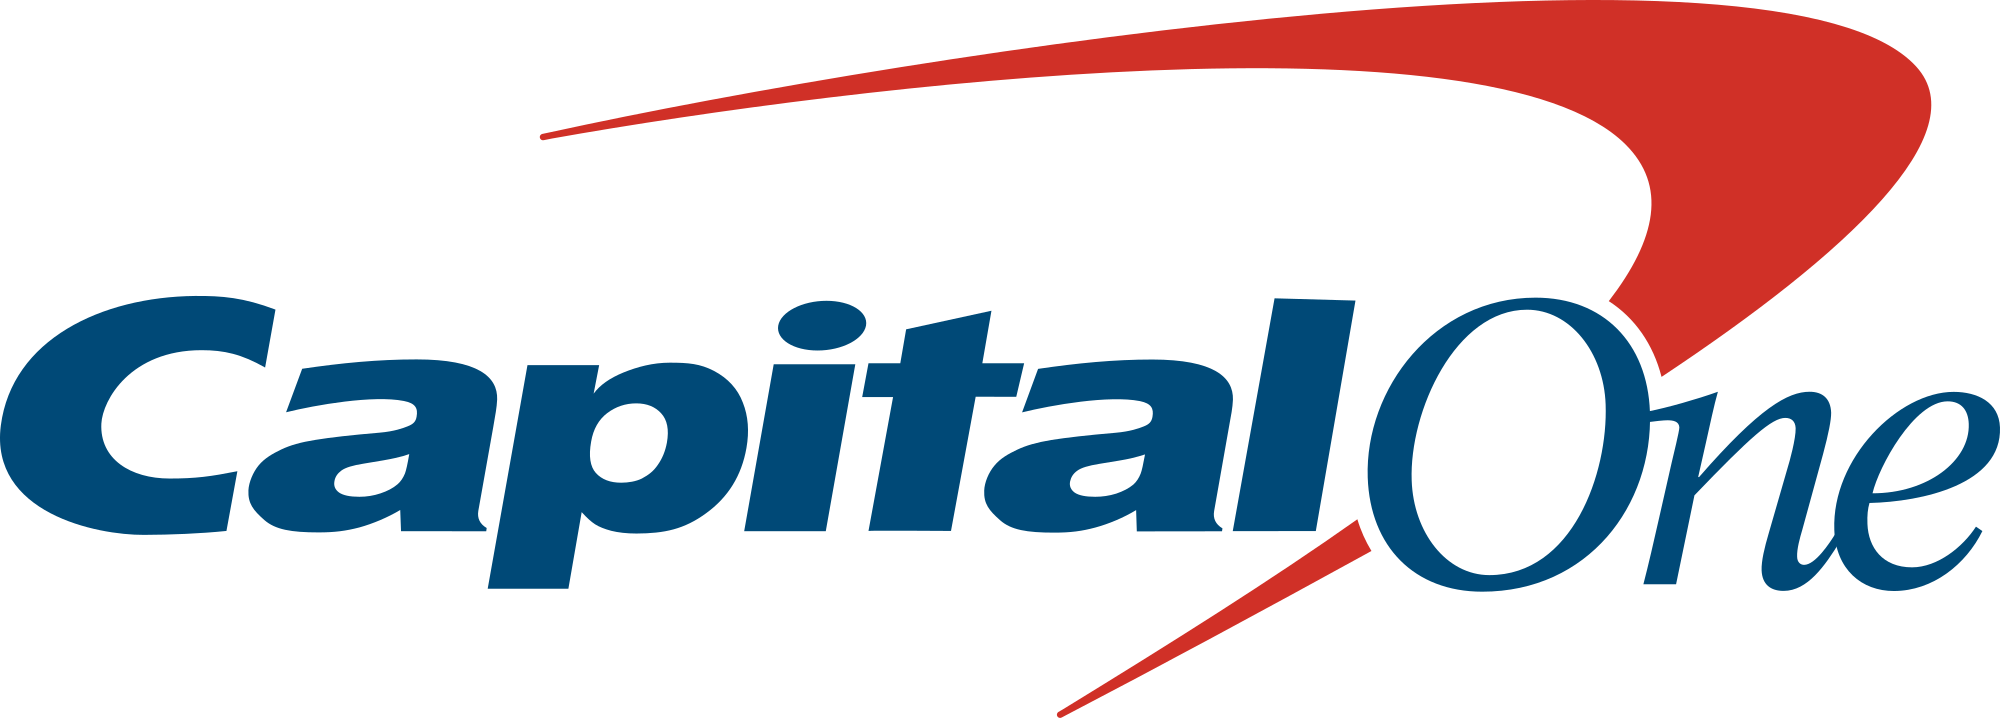 Featured Image For Capital One Testimonial